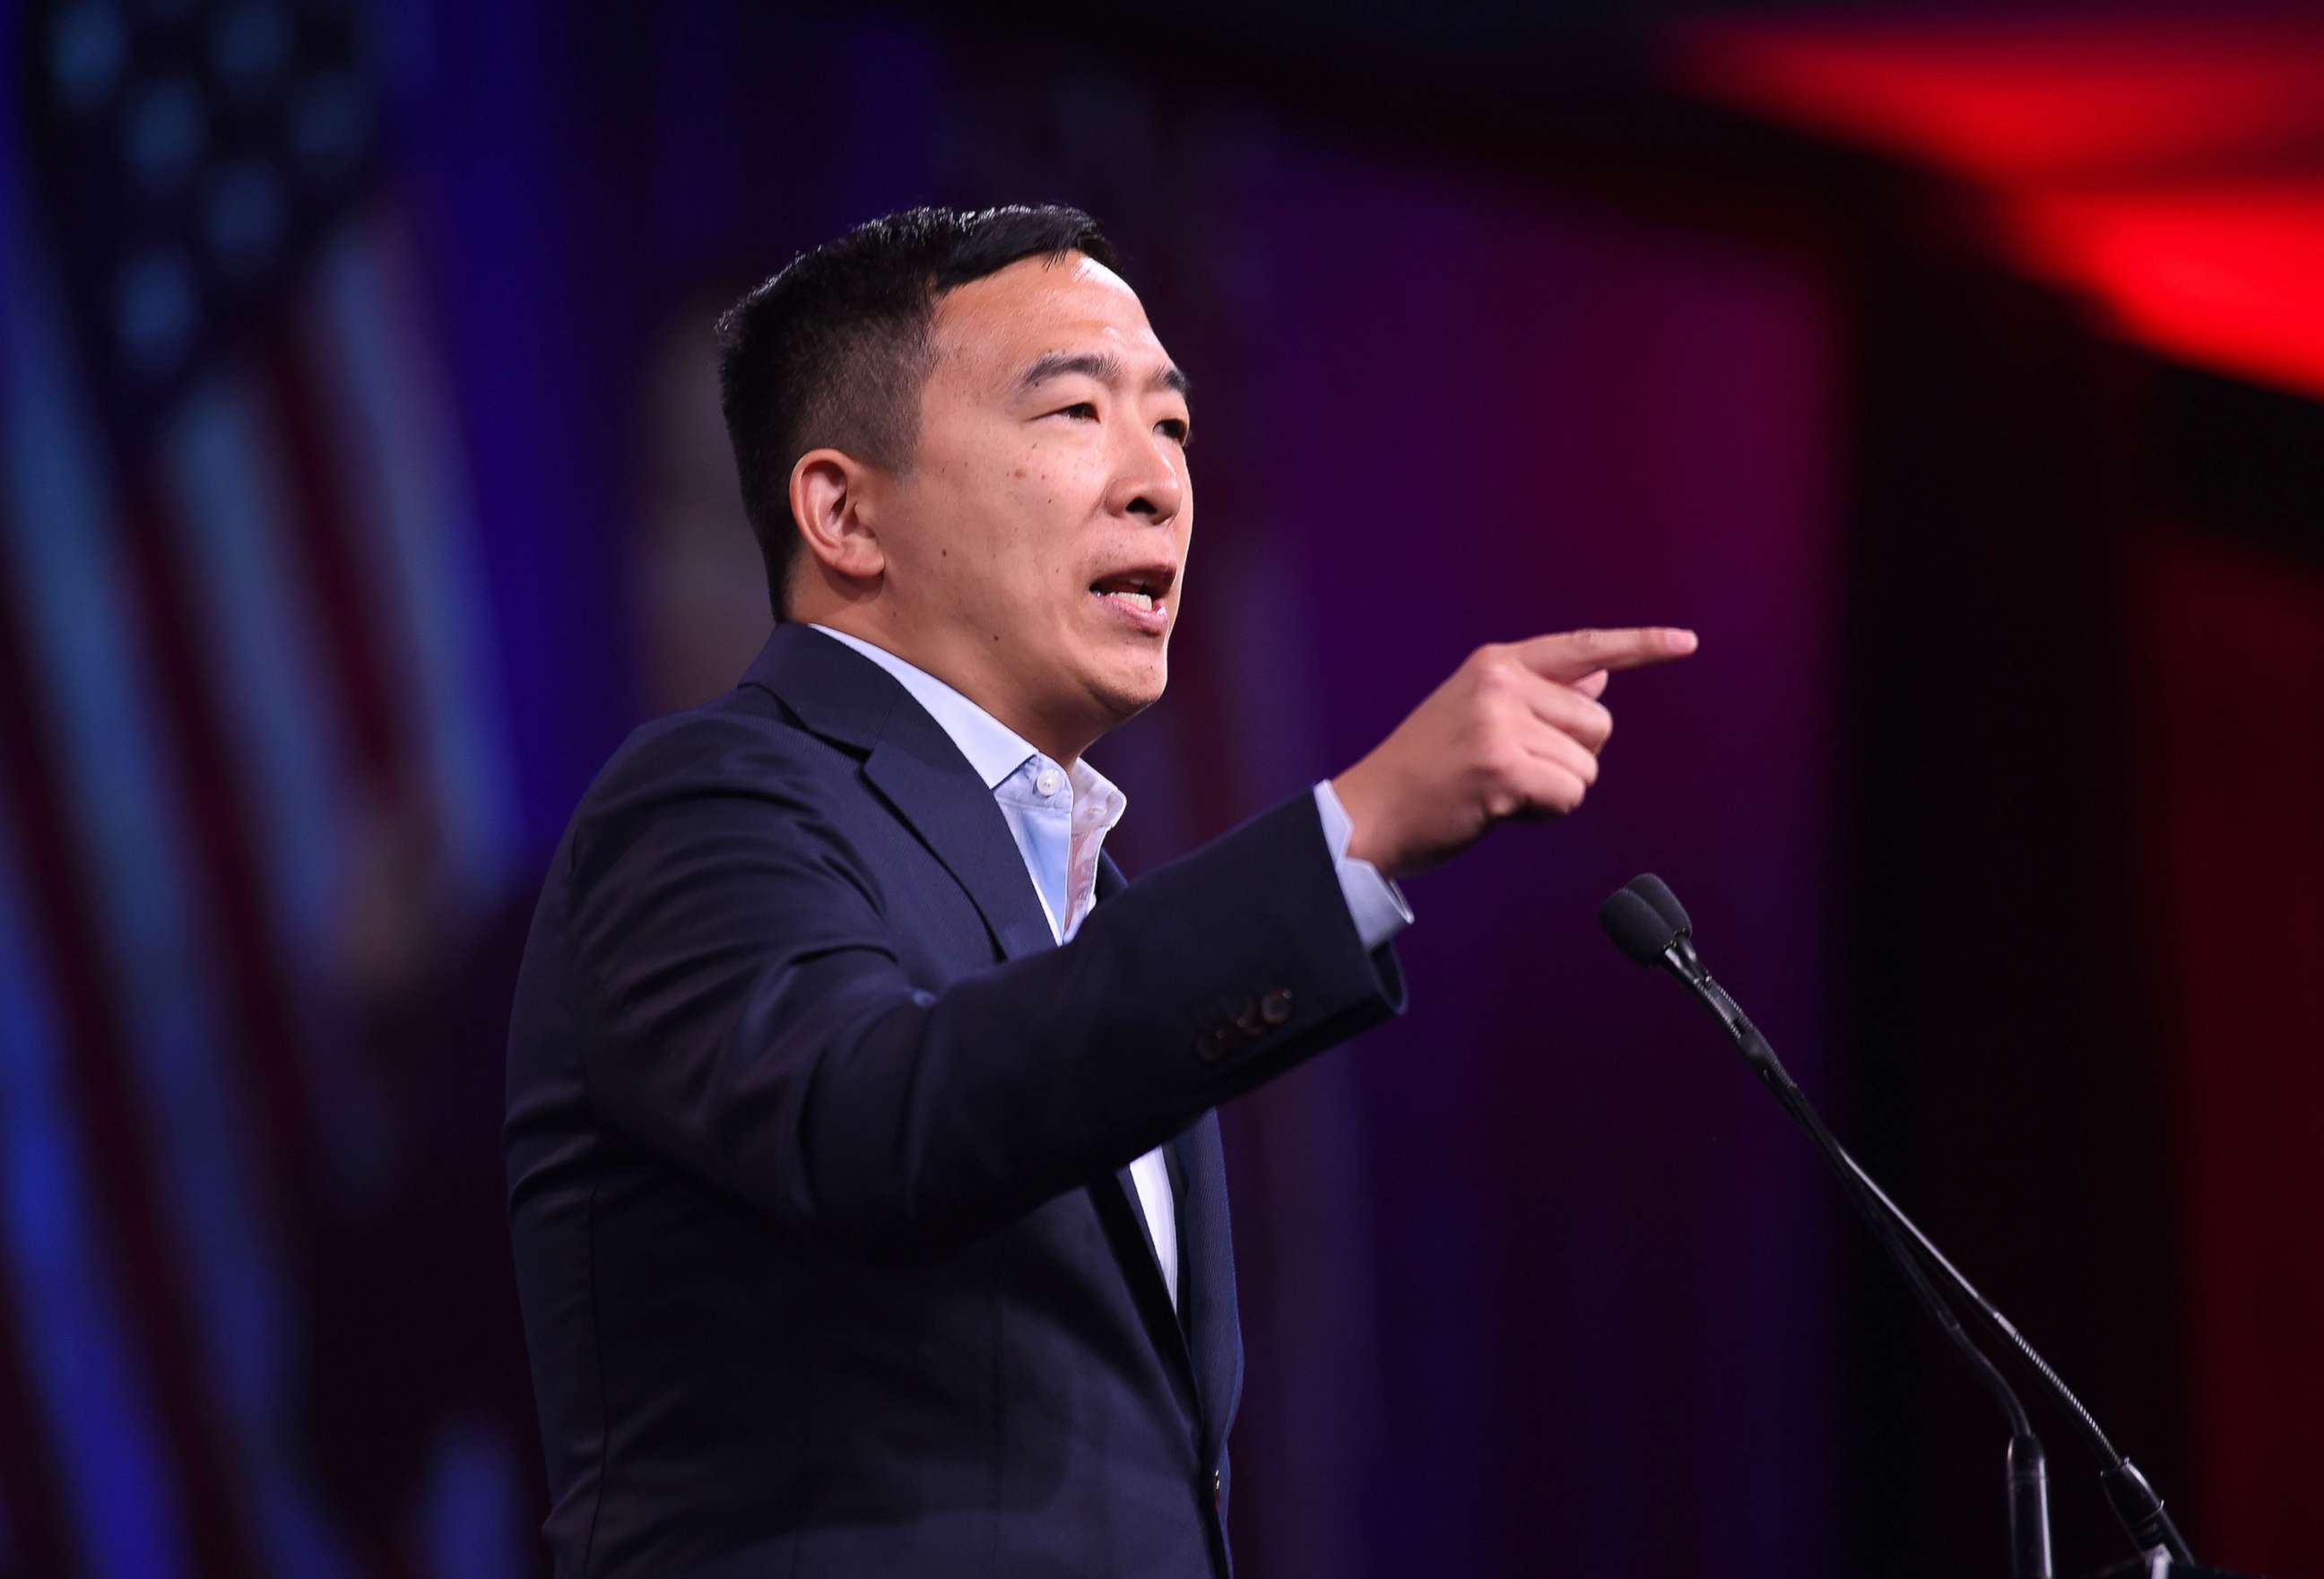 PHOTO: 2020 Democratic Presidential hopeful Andrew Yang speaks on-stage during the Democratic National Committee's summer meeting in San Francisco, Calif., Aug. 23, 2019.